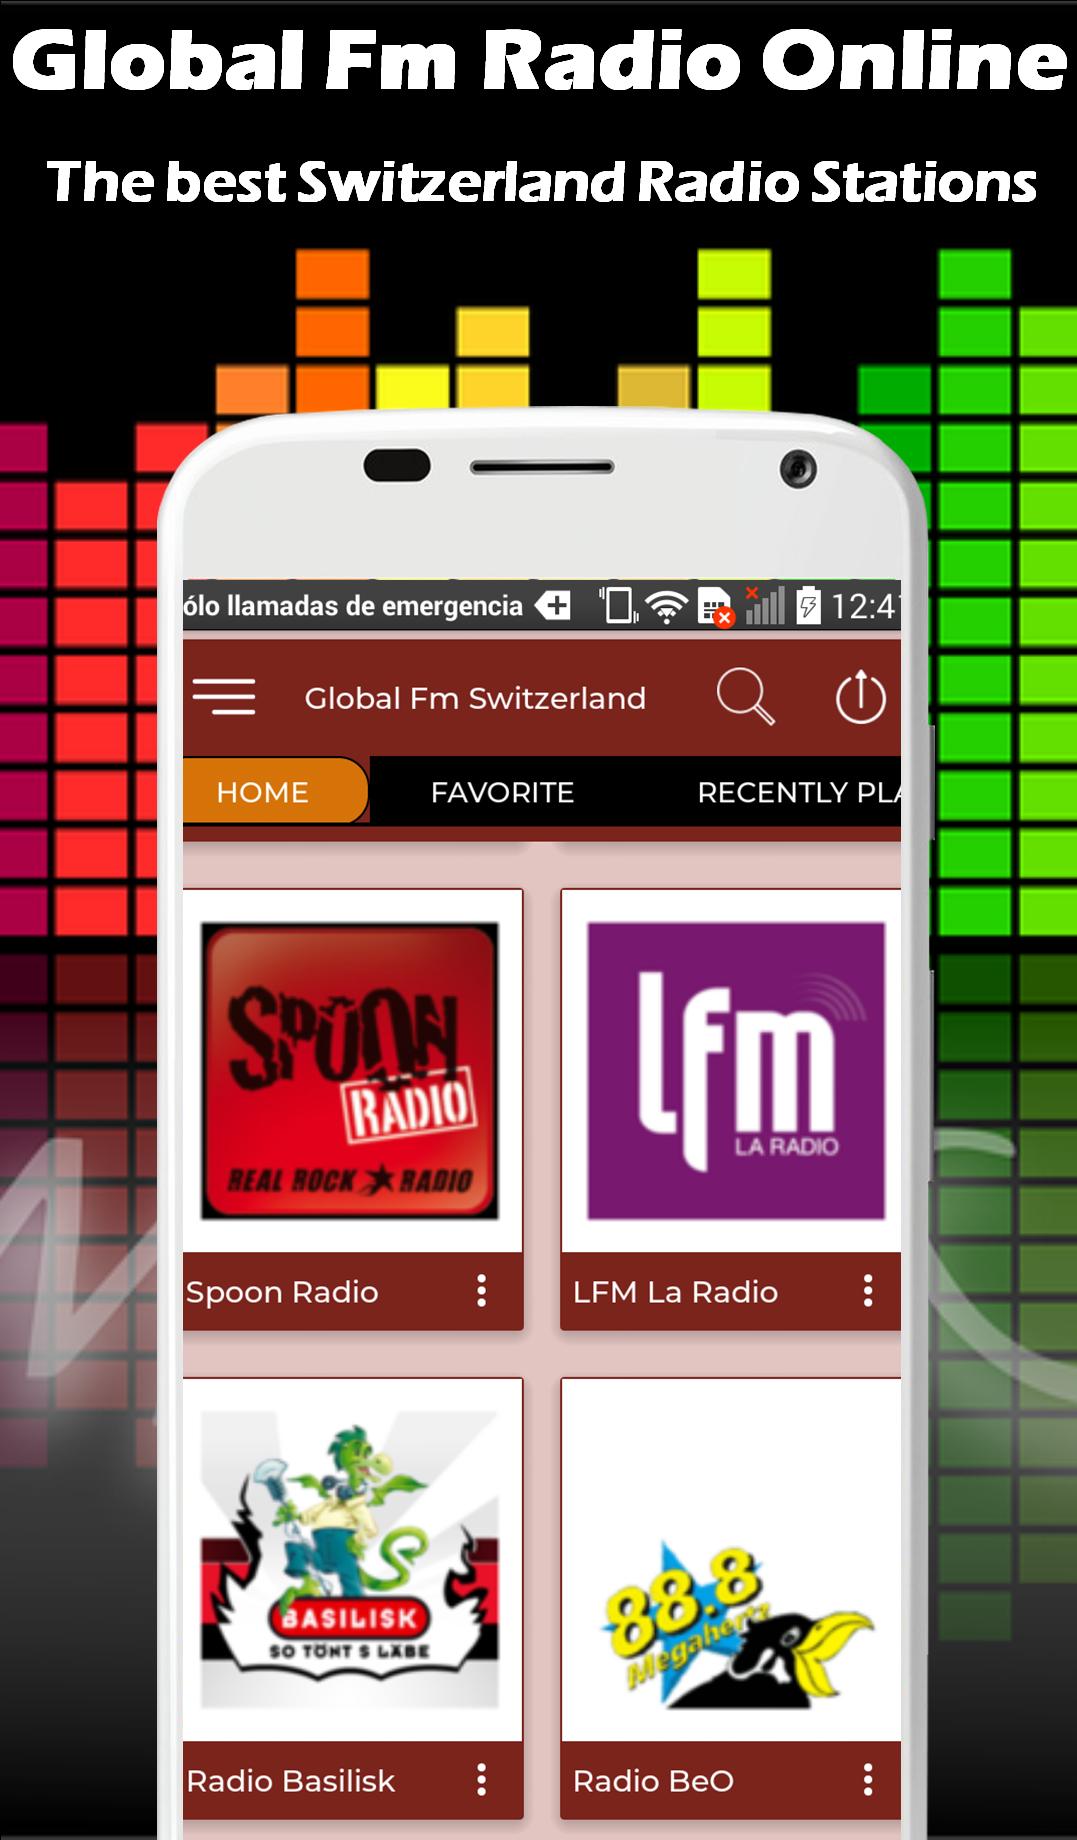 Global Fm Radio Online Switzerland Radiostations for Android - APK Download